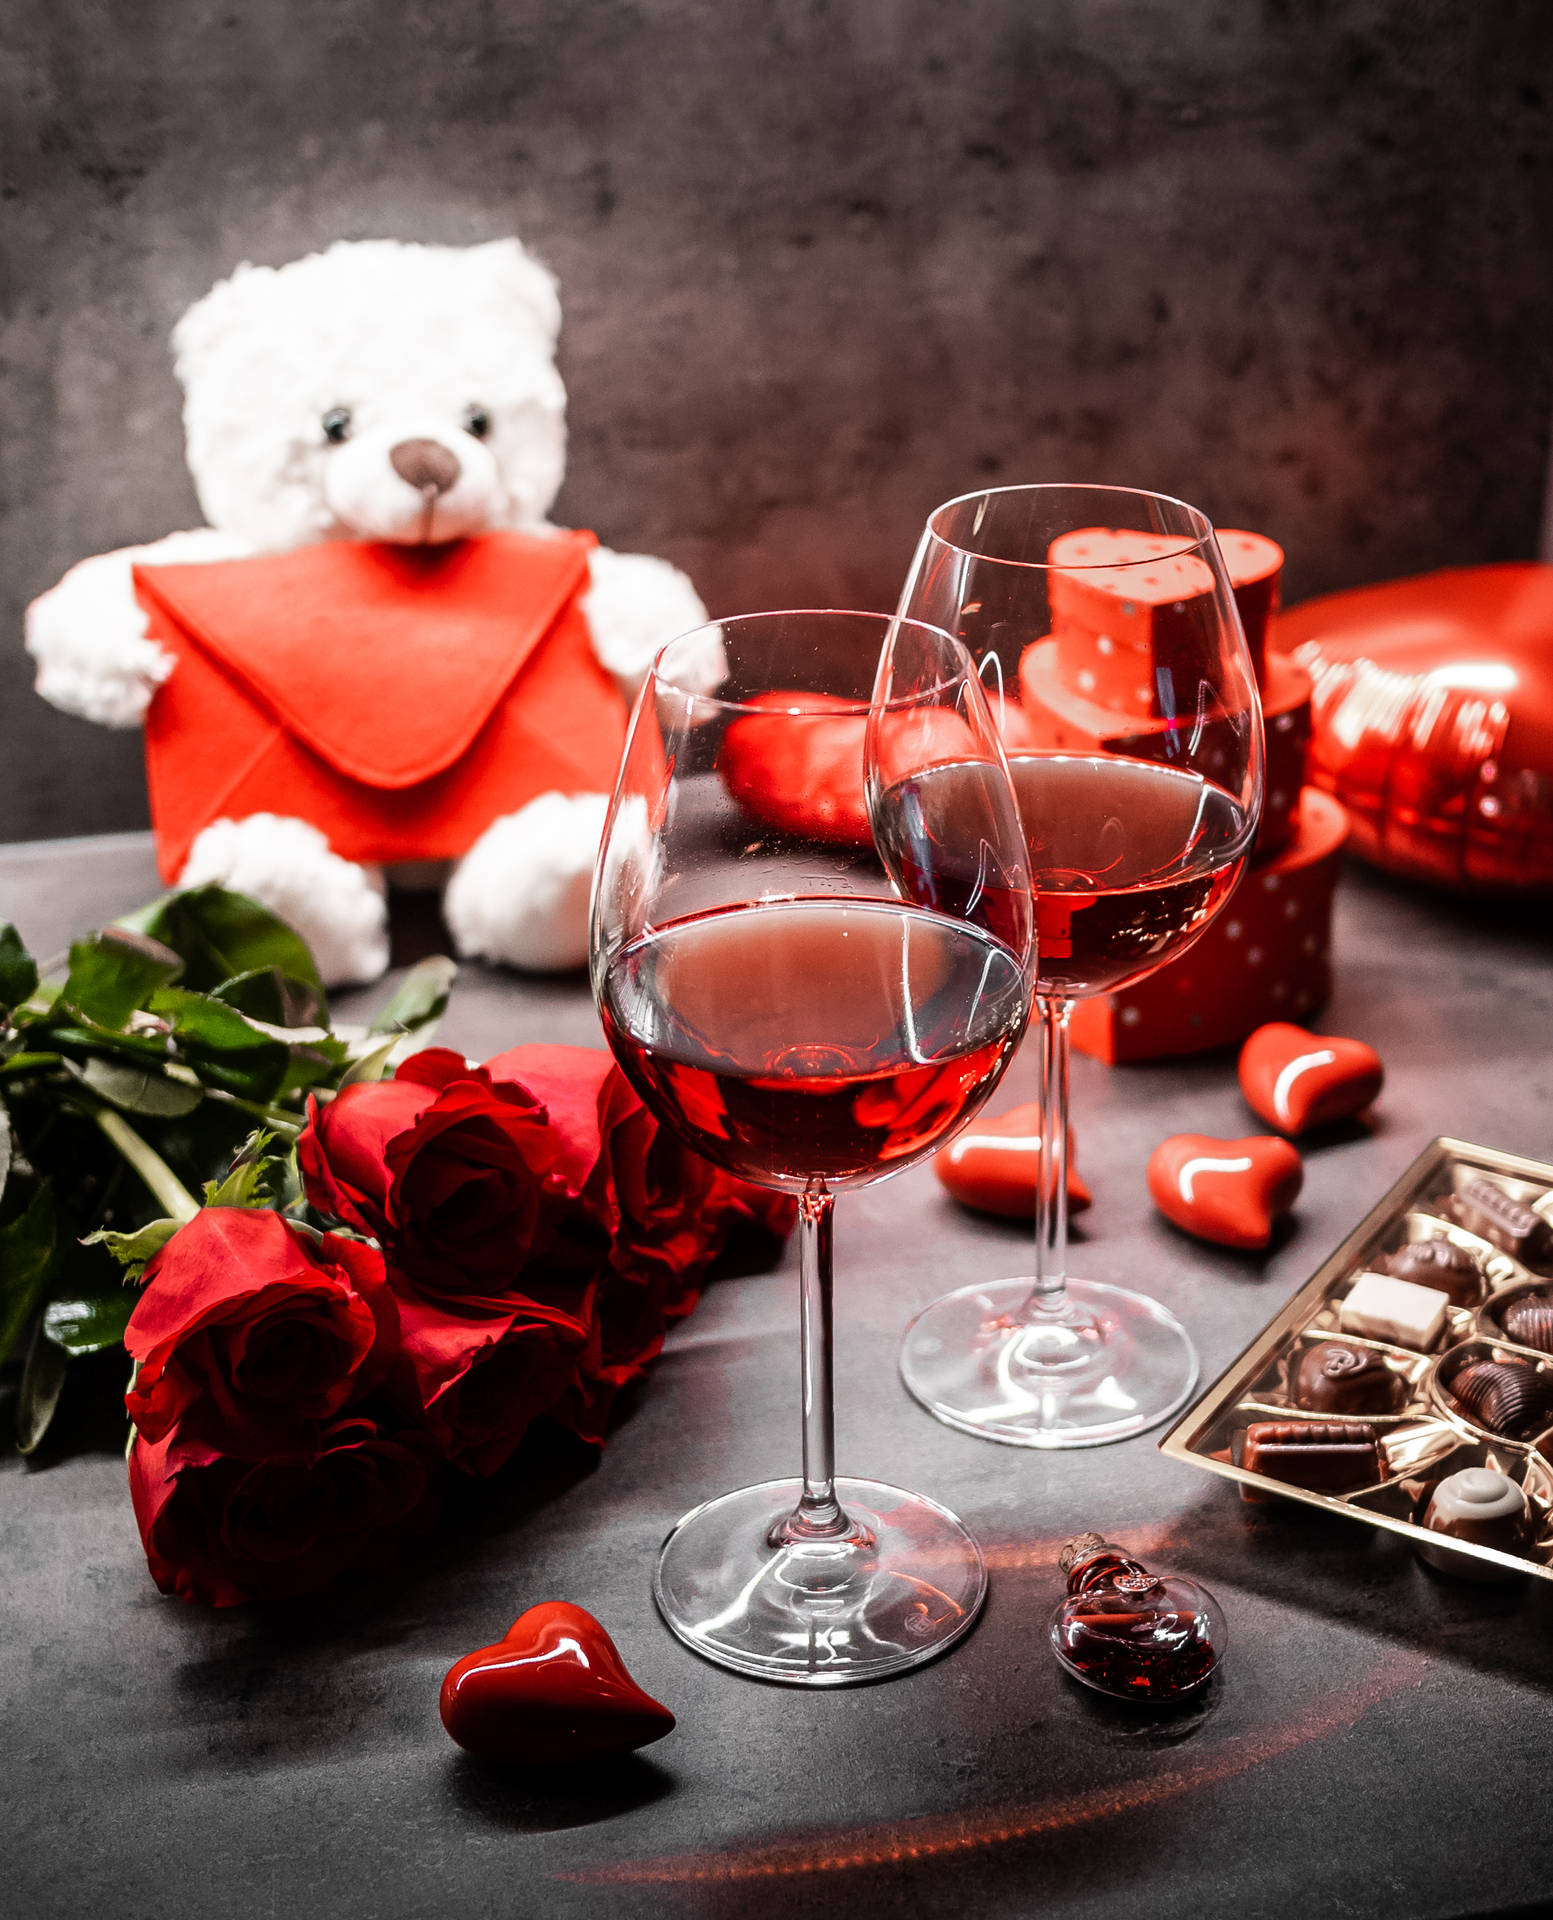 Romantic Love Flowers Red Roses And Wine Wallpaper